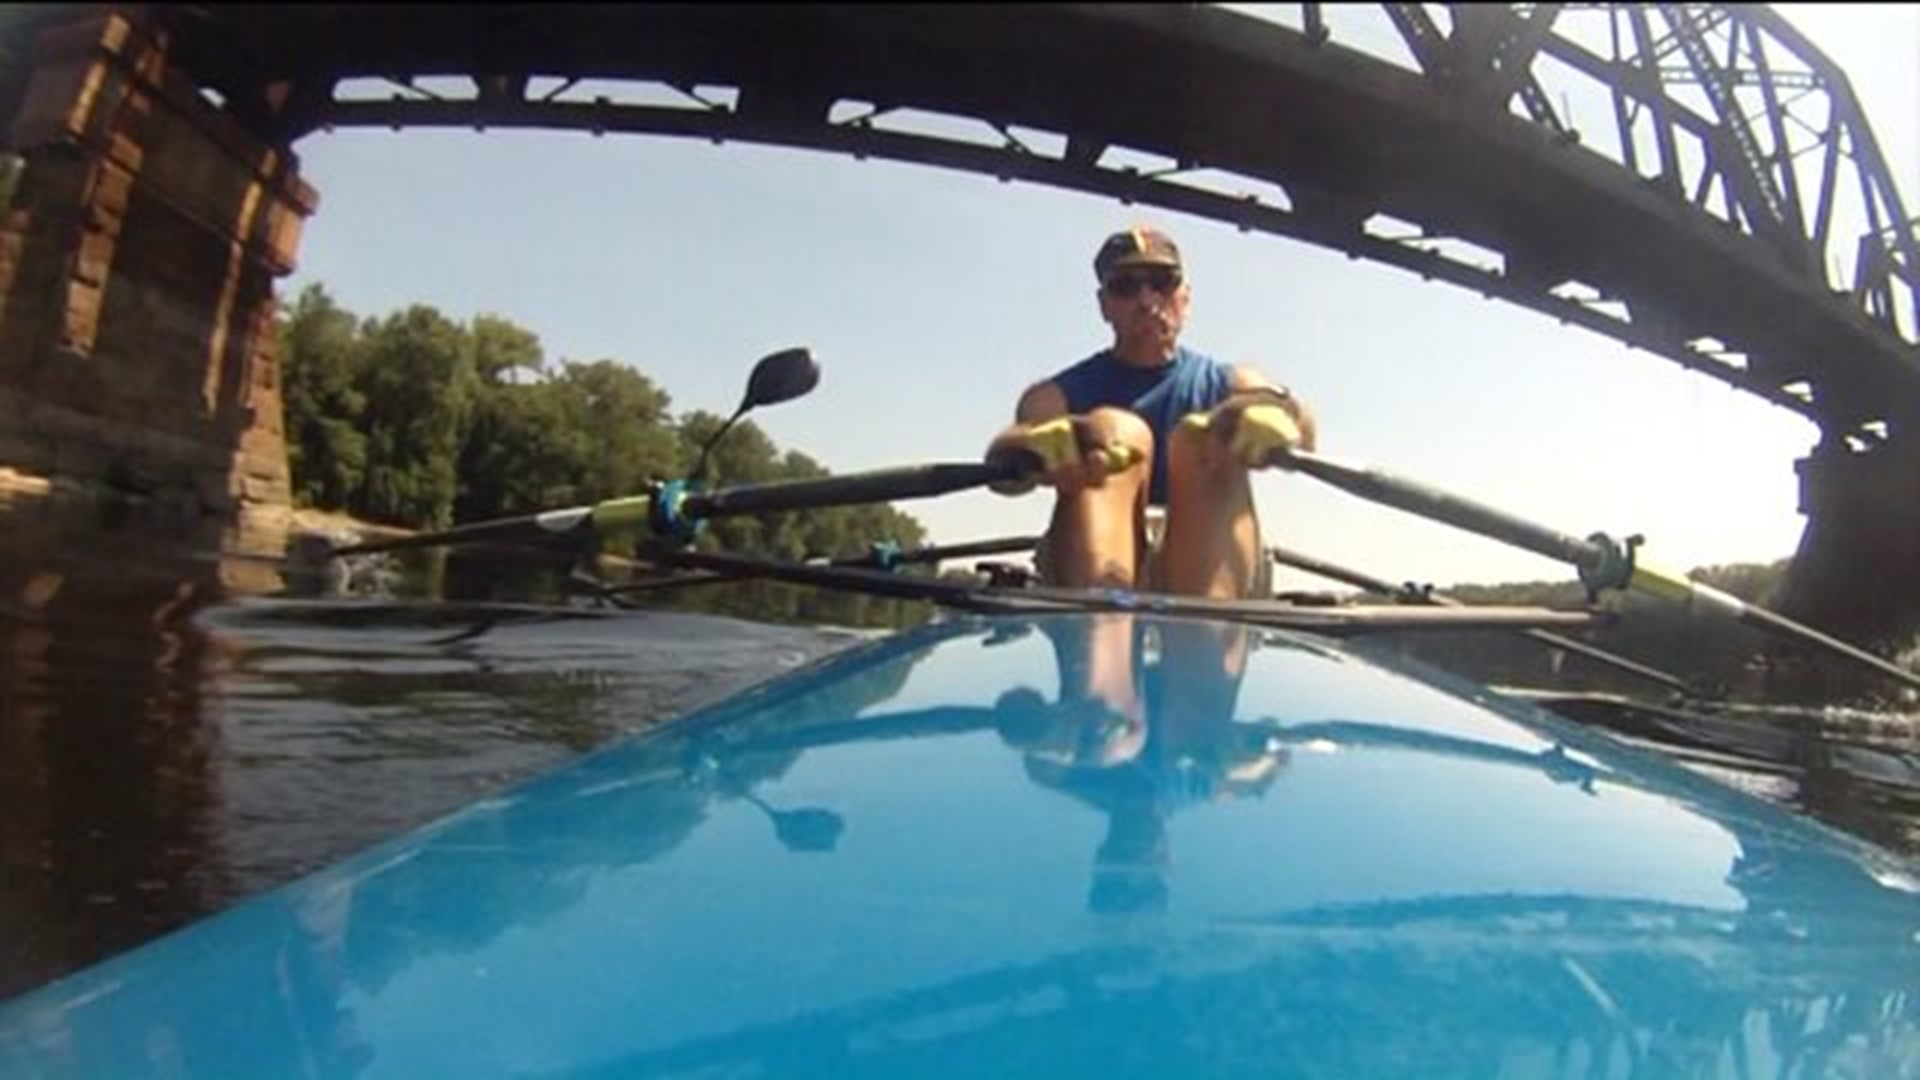 Physical therapists take adaptive approach to rowing